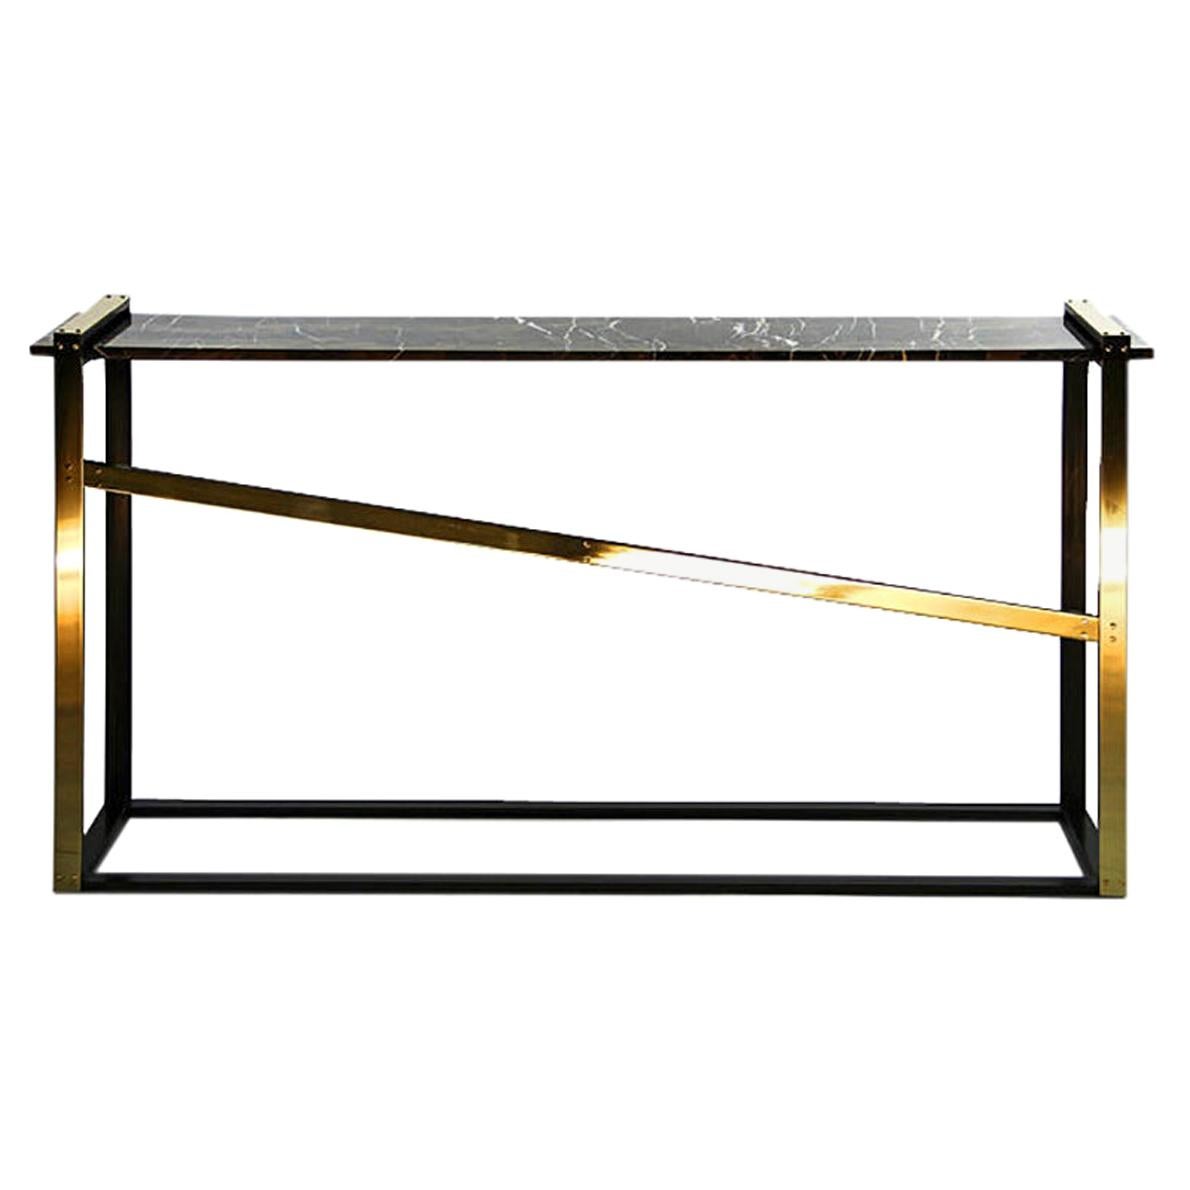 Robert Console Table in Blackened Steel, Saint Laurent Marble and Brass Accents For Sale